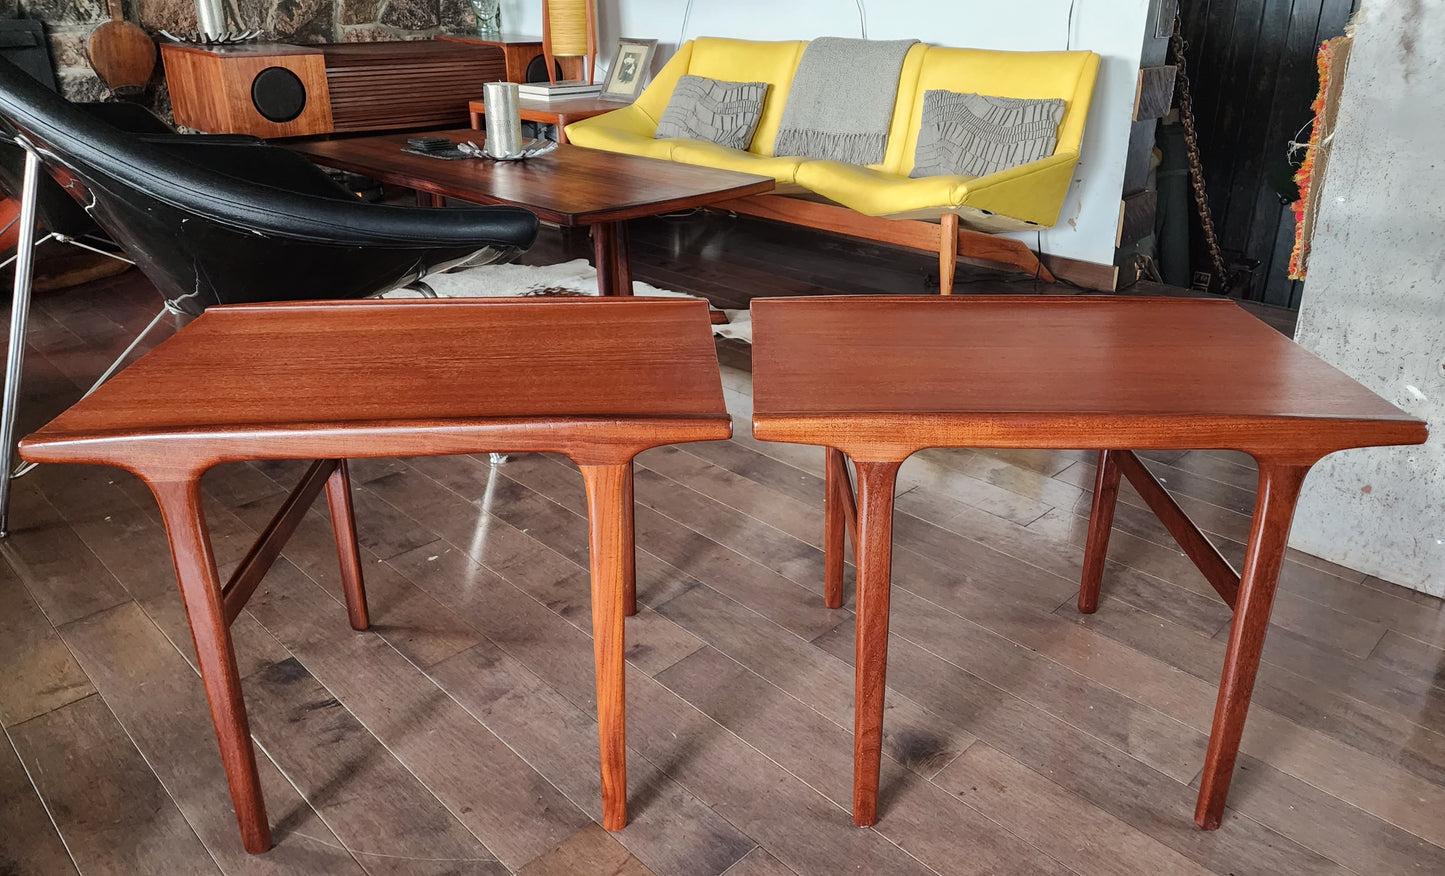 2 REFINISHED Mid Century Modern Teak Accent Tables